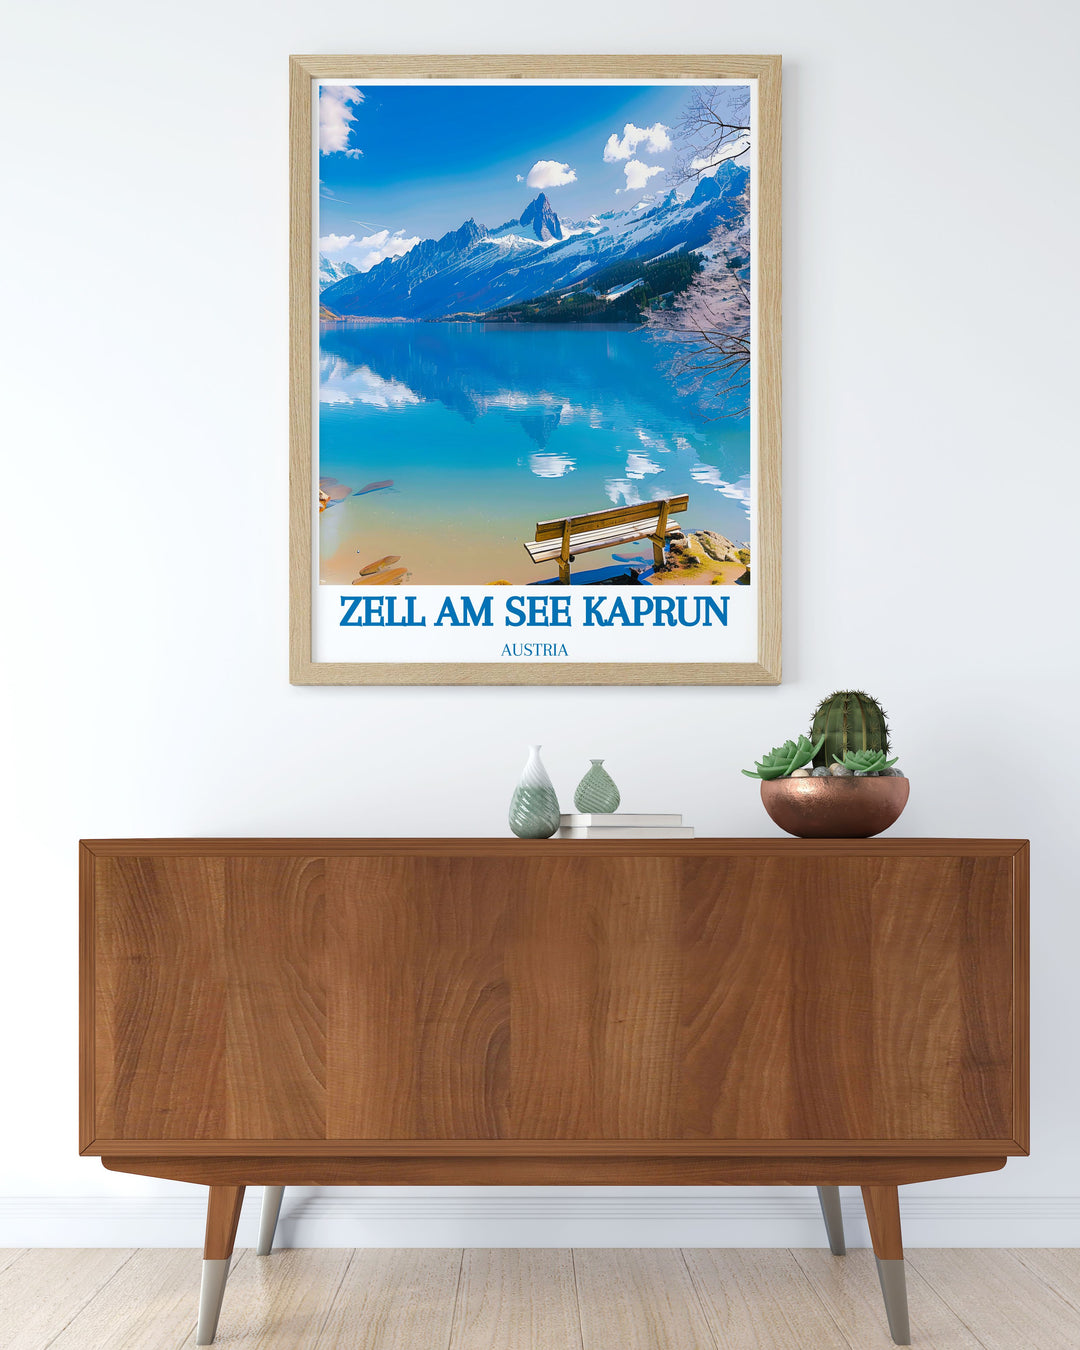 Home decor featuring the majestic Lake Zell in Zell am See, Austria. This print highlights the clear waters surrounded by towering alpine peaks, offering a blend of natural beauty and tranquility, ideal for adding a touch of serenity to your living space. The detailed illustration captures the essence of this stunning alpine lake, making it a standout piece in any room.